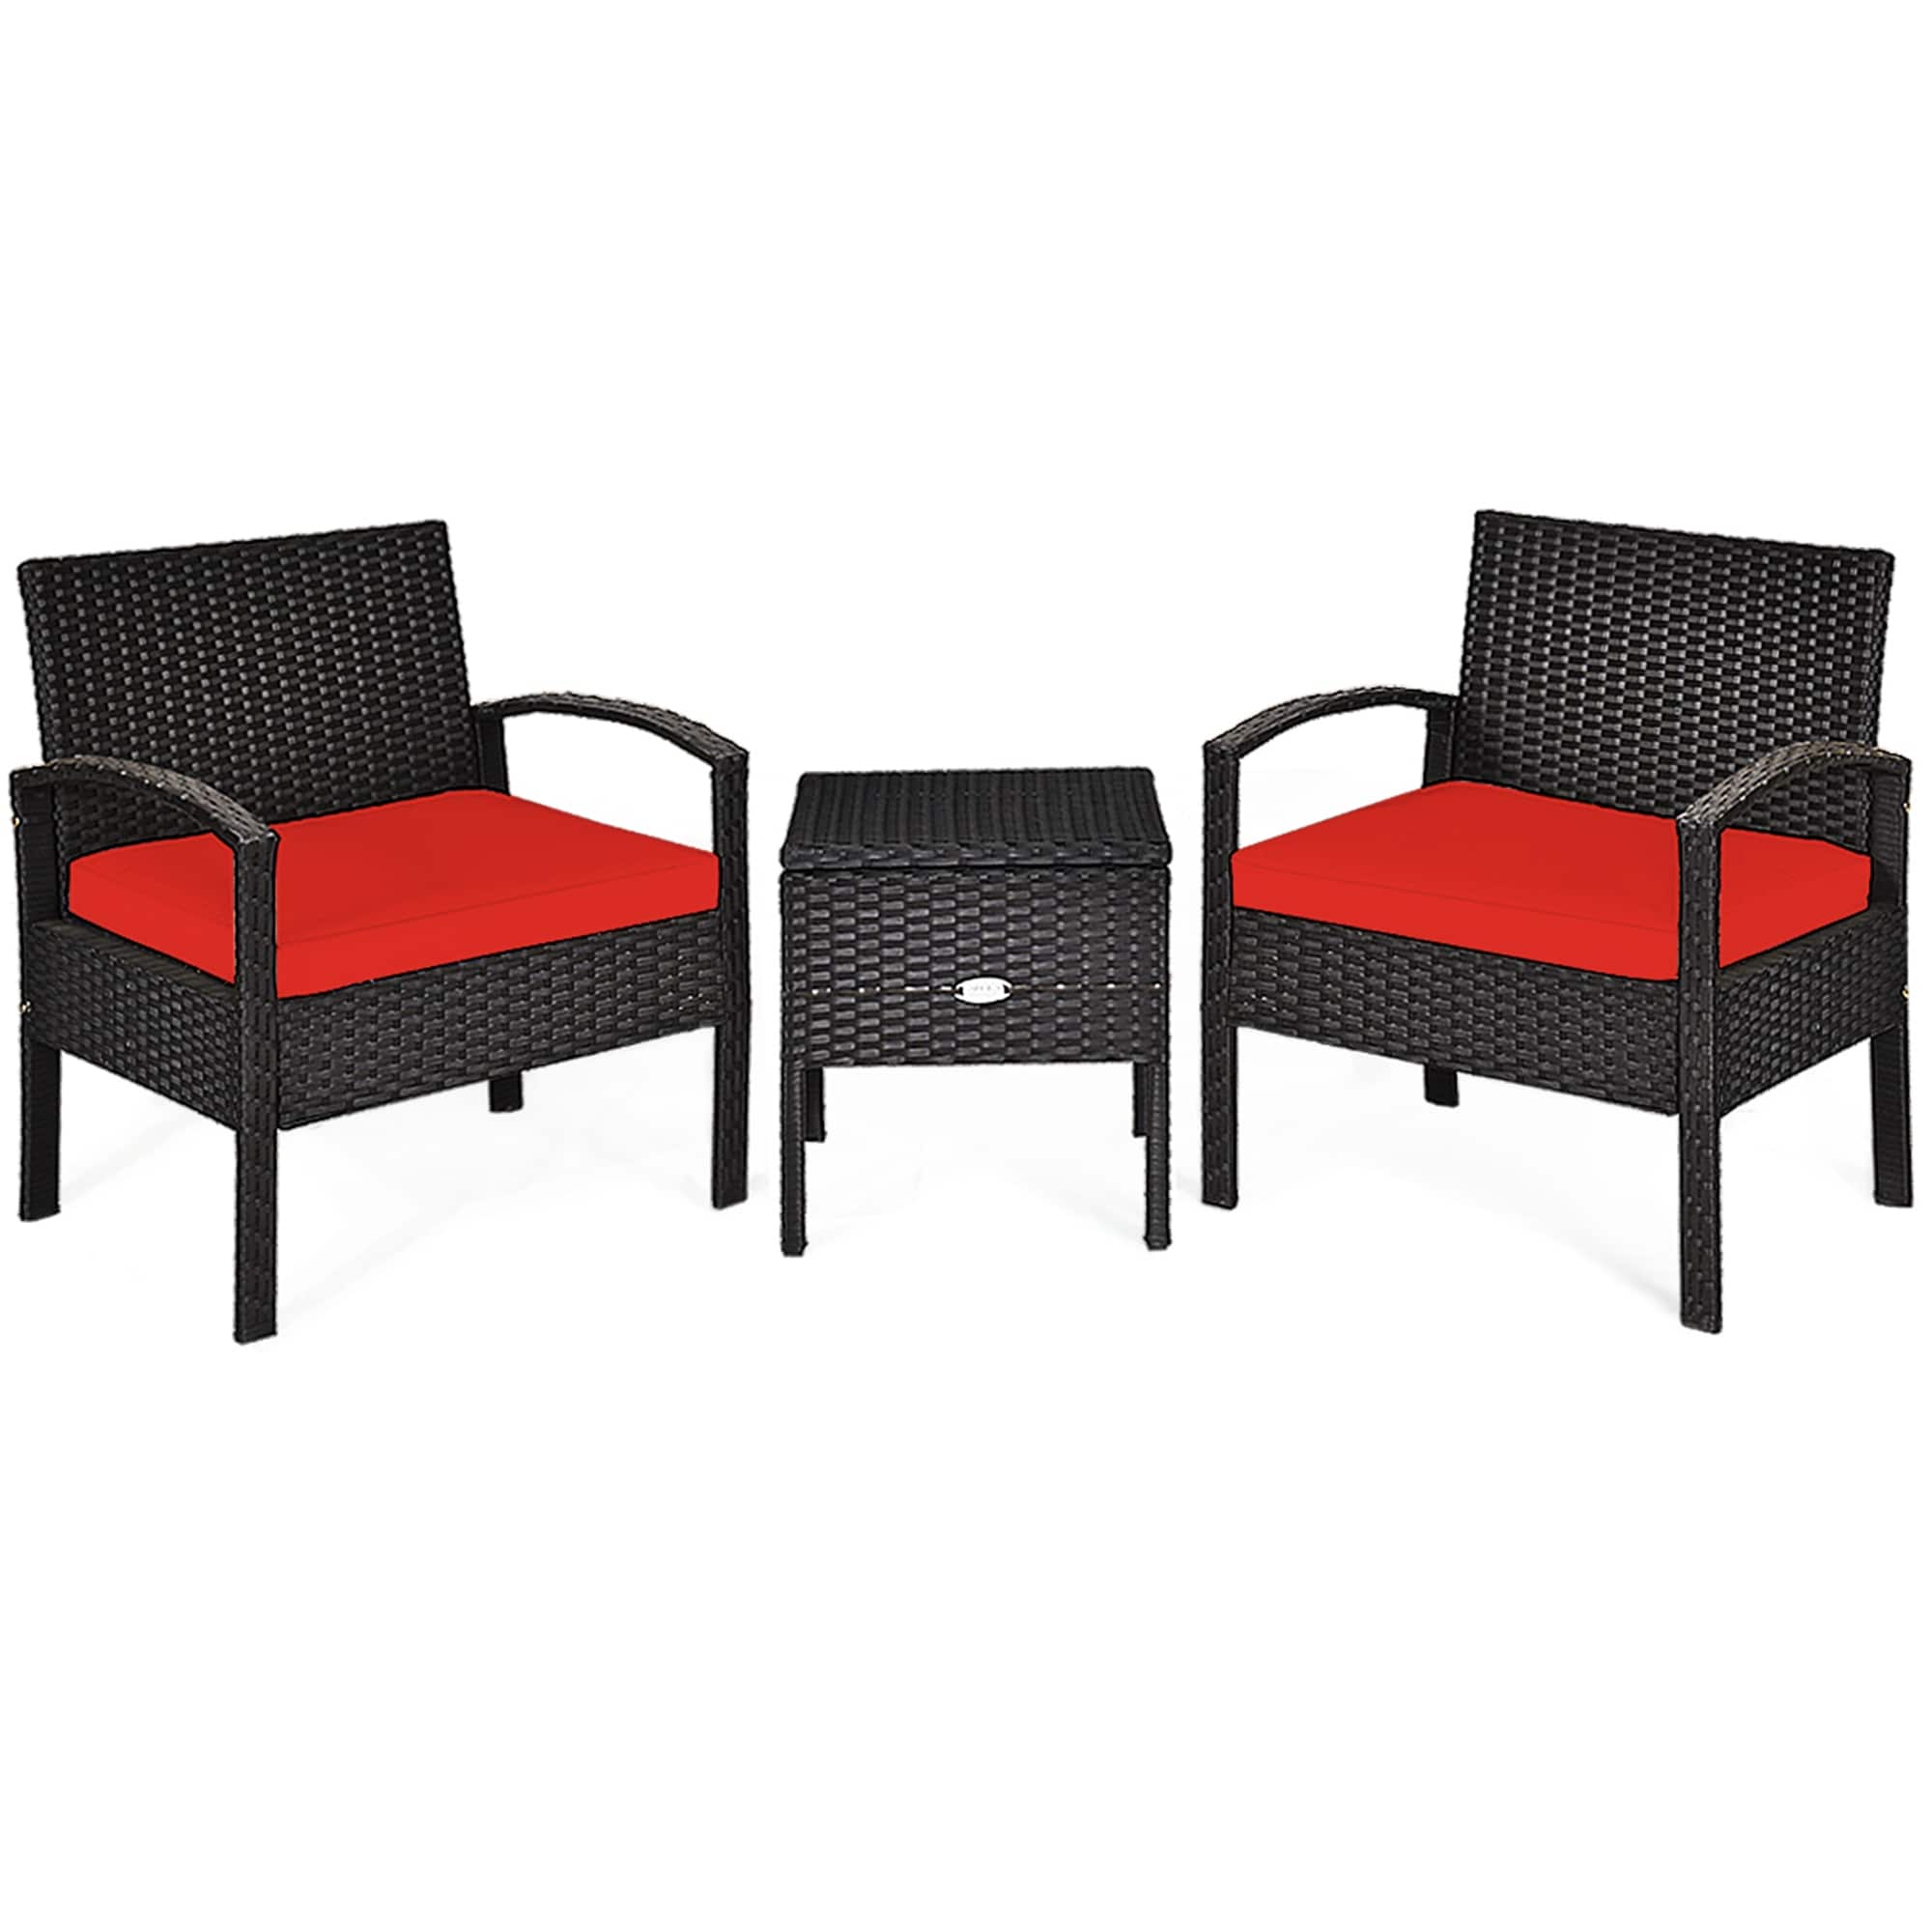 3-piece Pe Rattan Wicker Sofa Set With Washable And Removable Cushion